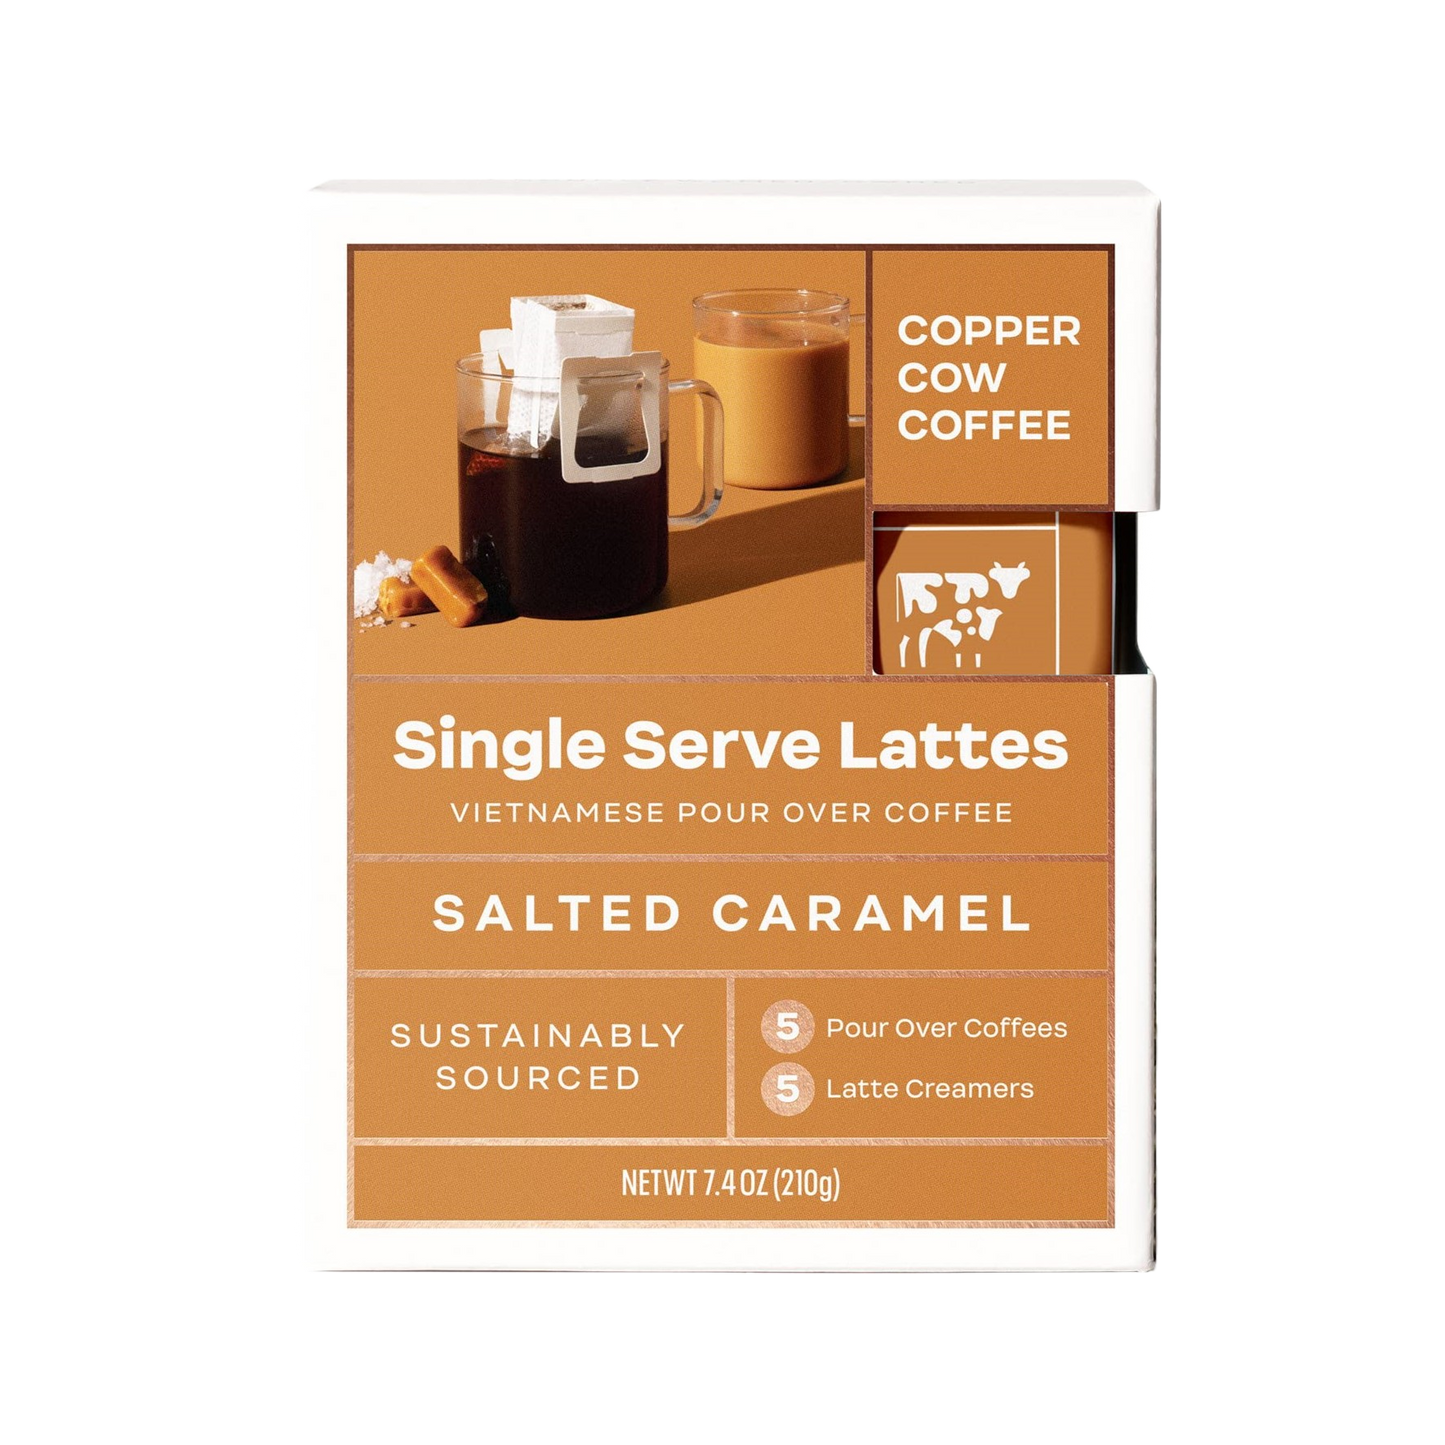 Copper Cow Coffee - 'Salted Caramel' Single-Serve Lattes (5PK)